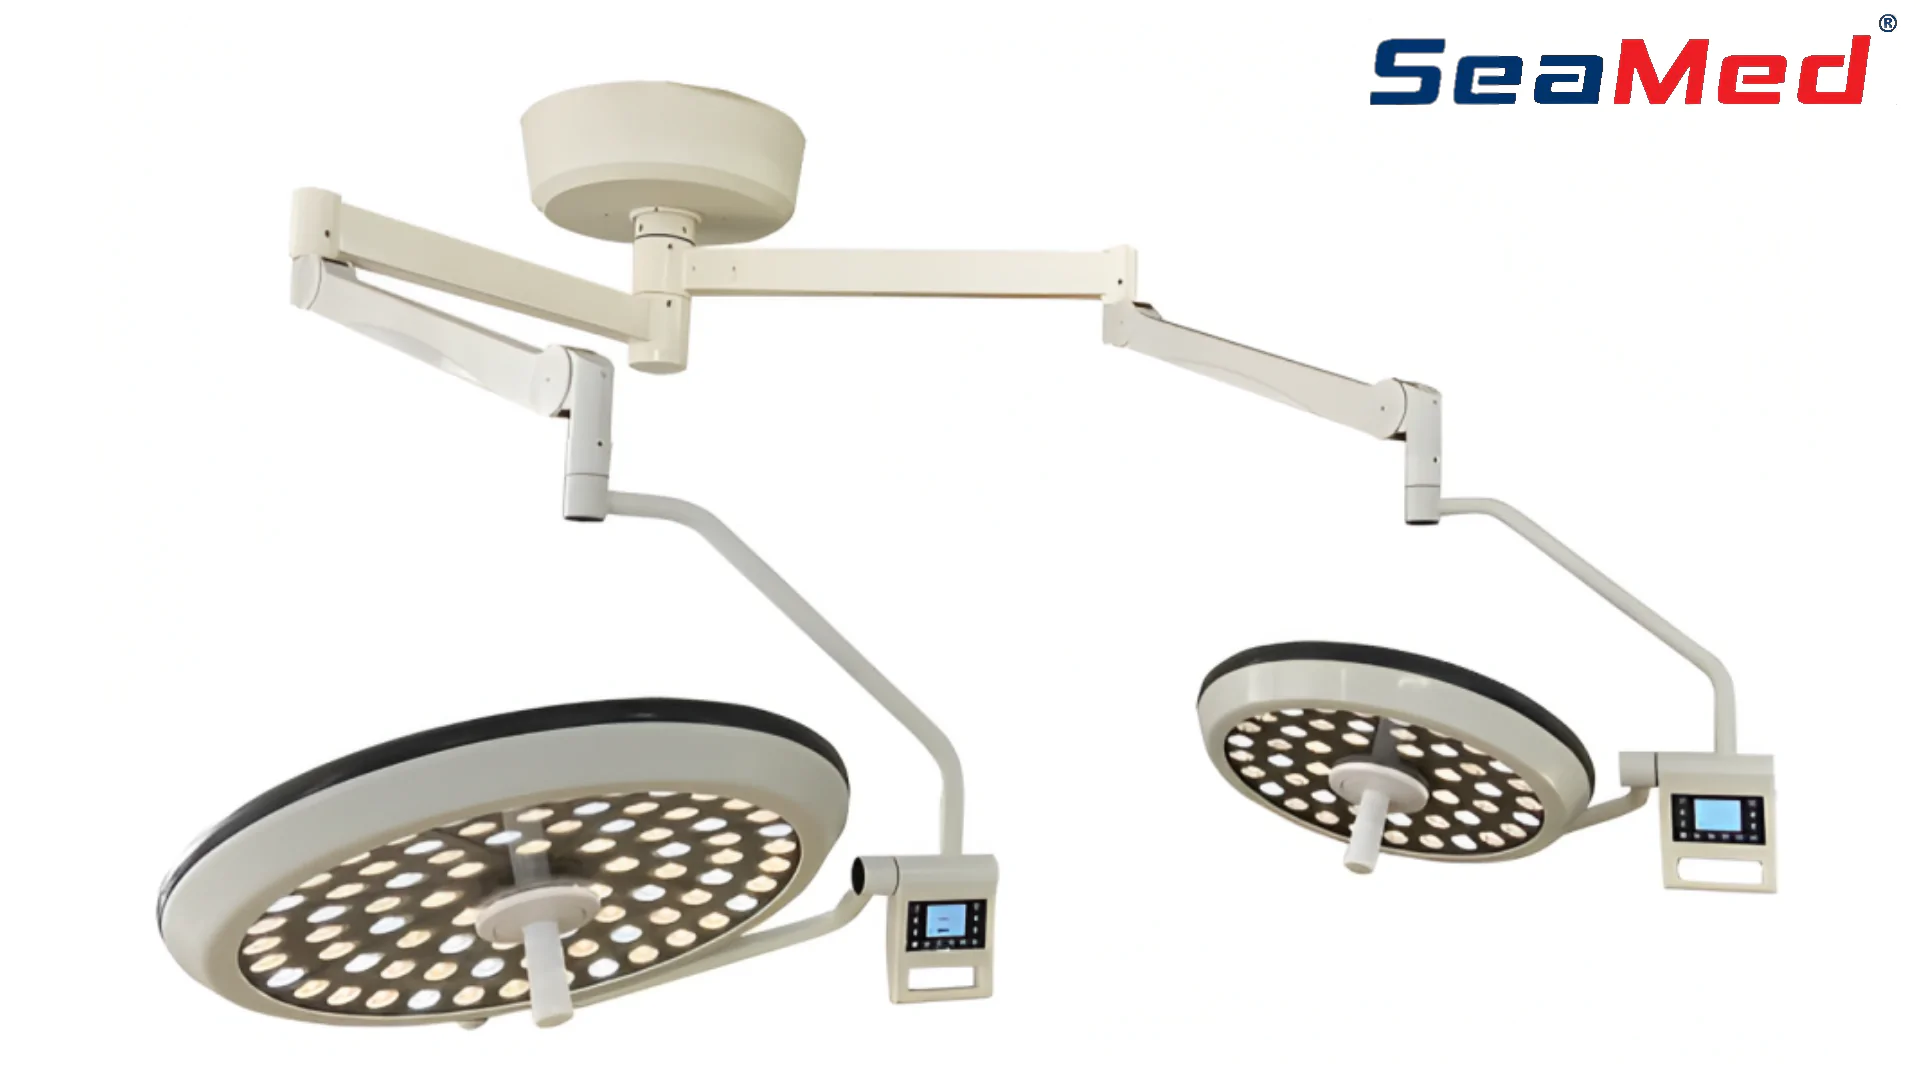 SEAMED LED-7050 DOUBLE HEAD OPERATING LAMP